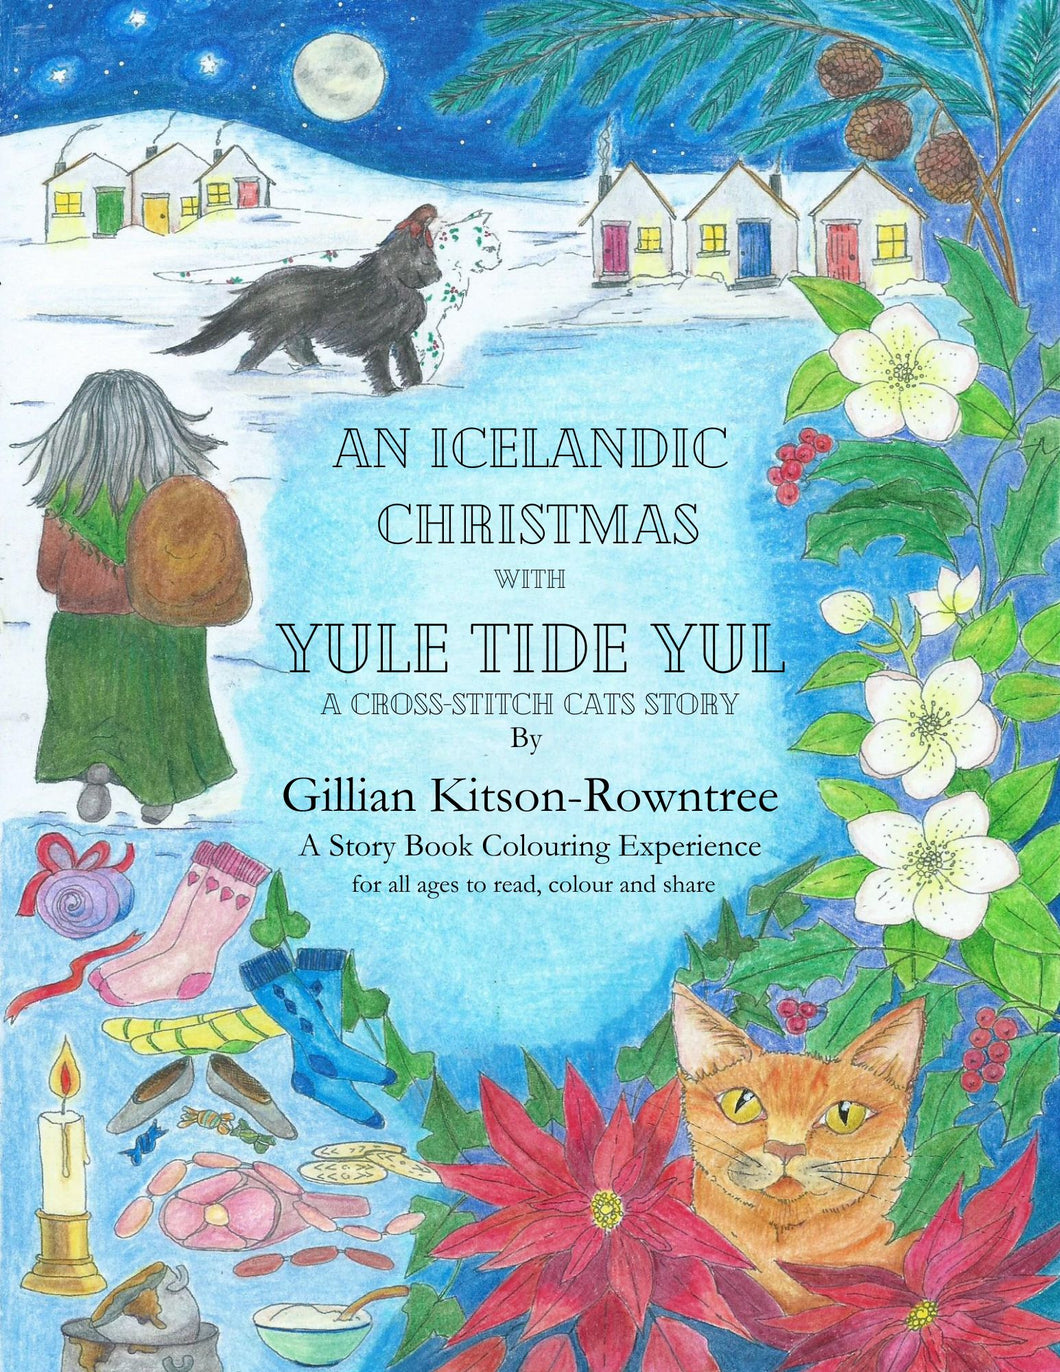 An Icelandic Christmas with Yule Tide Yul: A Cross-Stitch Cats Story, Story book, Colouring book